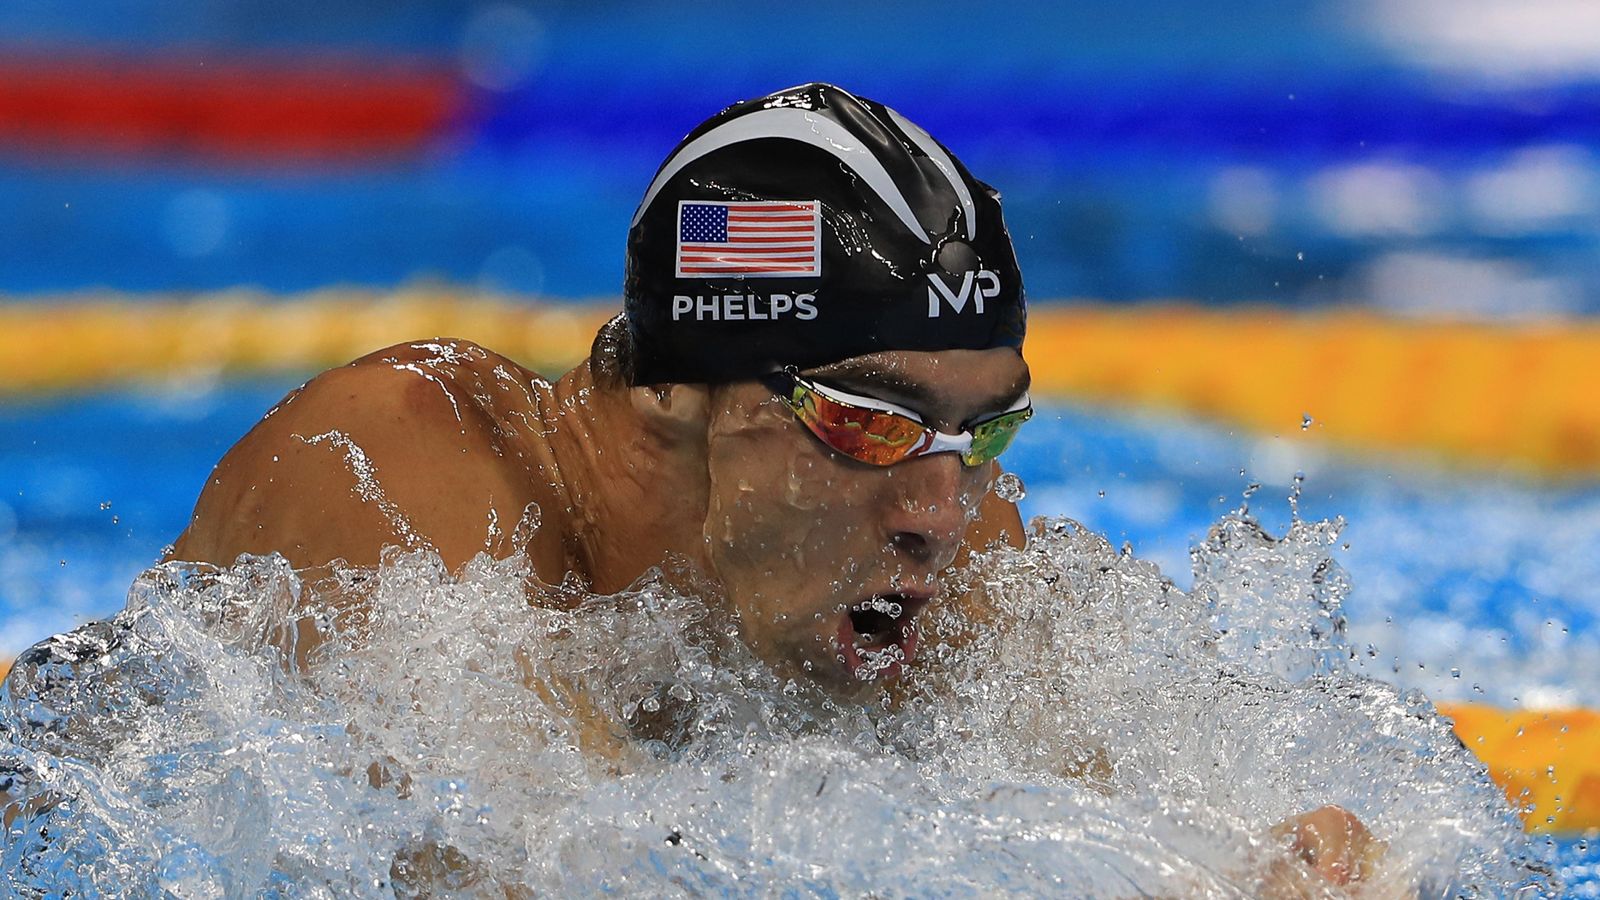 Michael Phelps makes it 22 Olympic gold medals in 200m individual